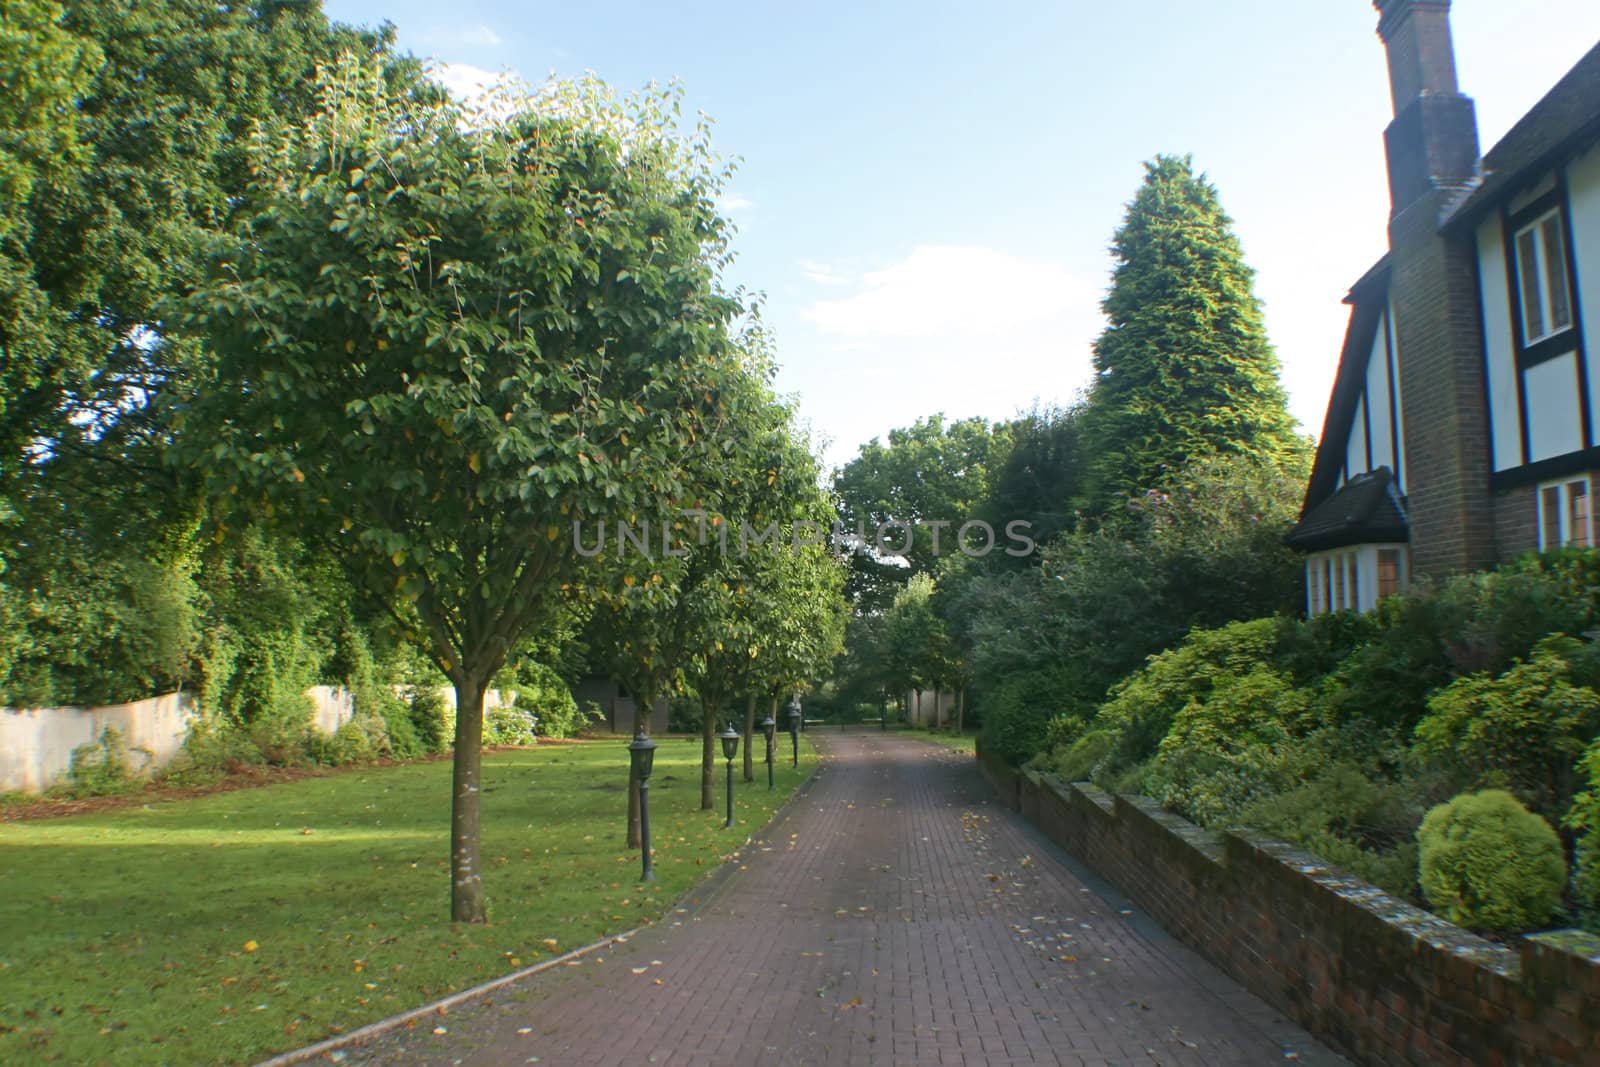 A Driveway to a Big Tudor House in the UK.